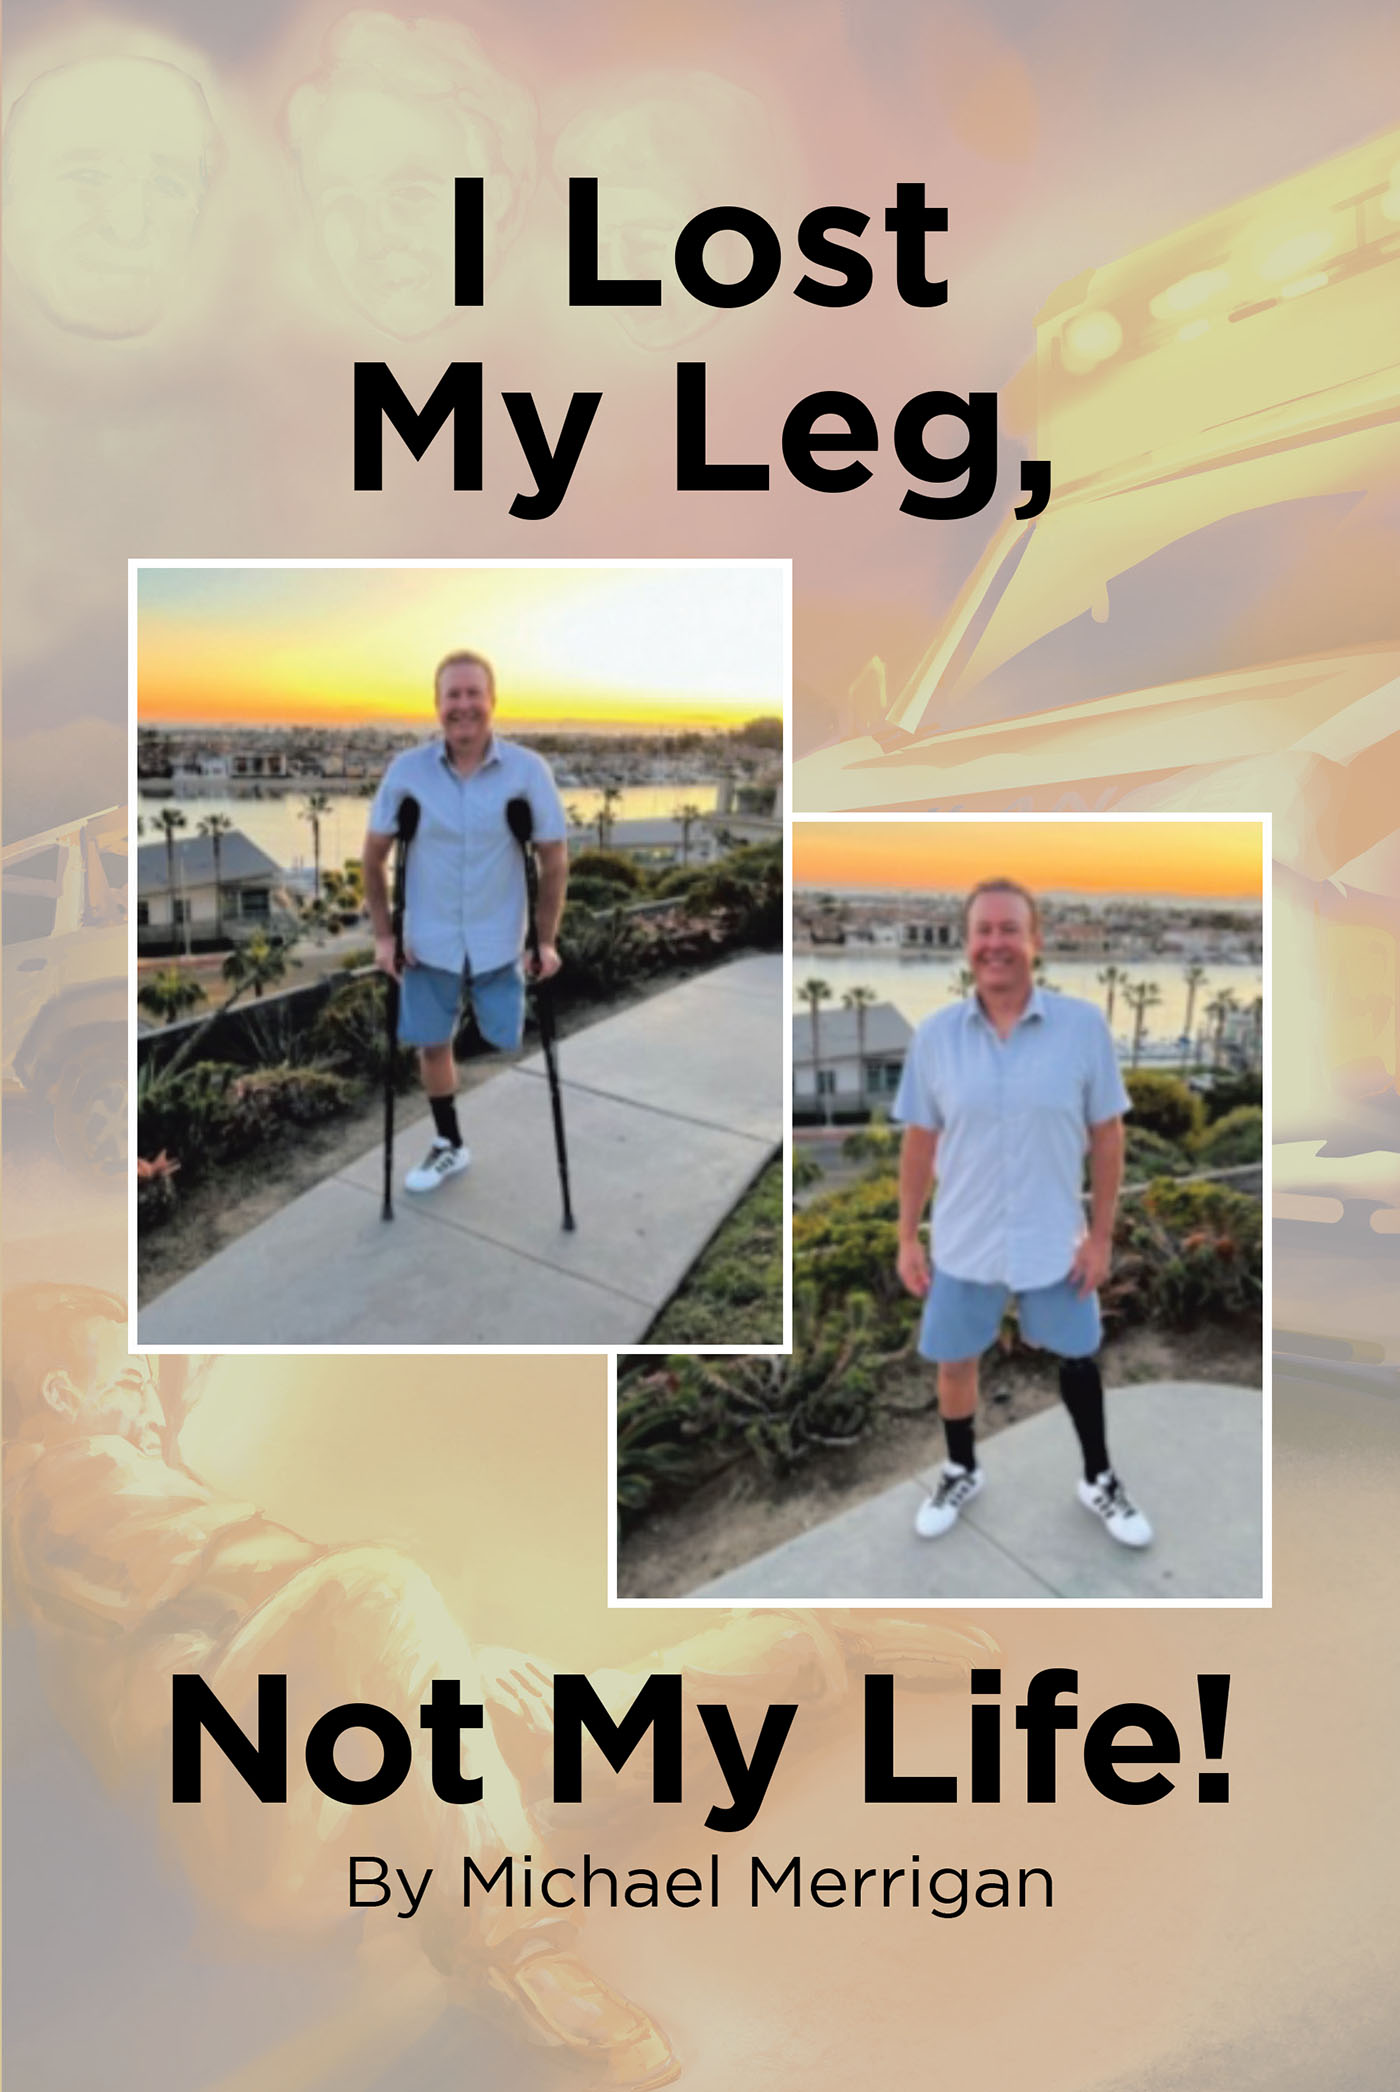 Author Michael Merrigan’s New Book, "I Lost My Leg, Not My Life!" Shares a Story of Self-Reflection, Perseverance, and Looking at Life from a Unique Perspective